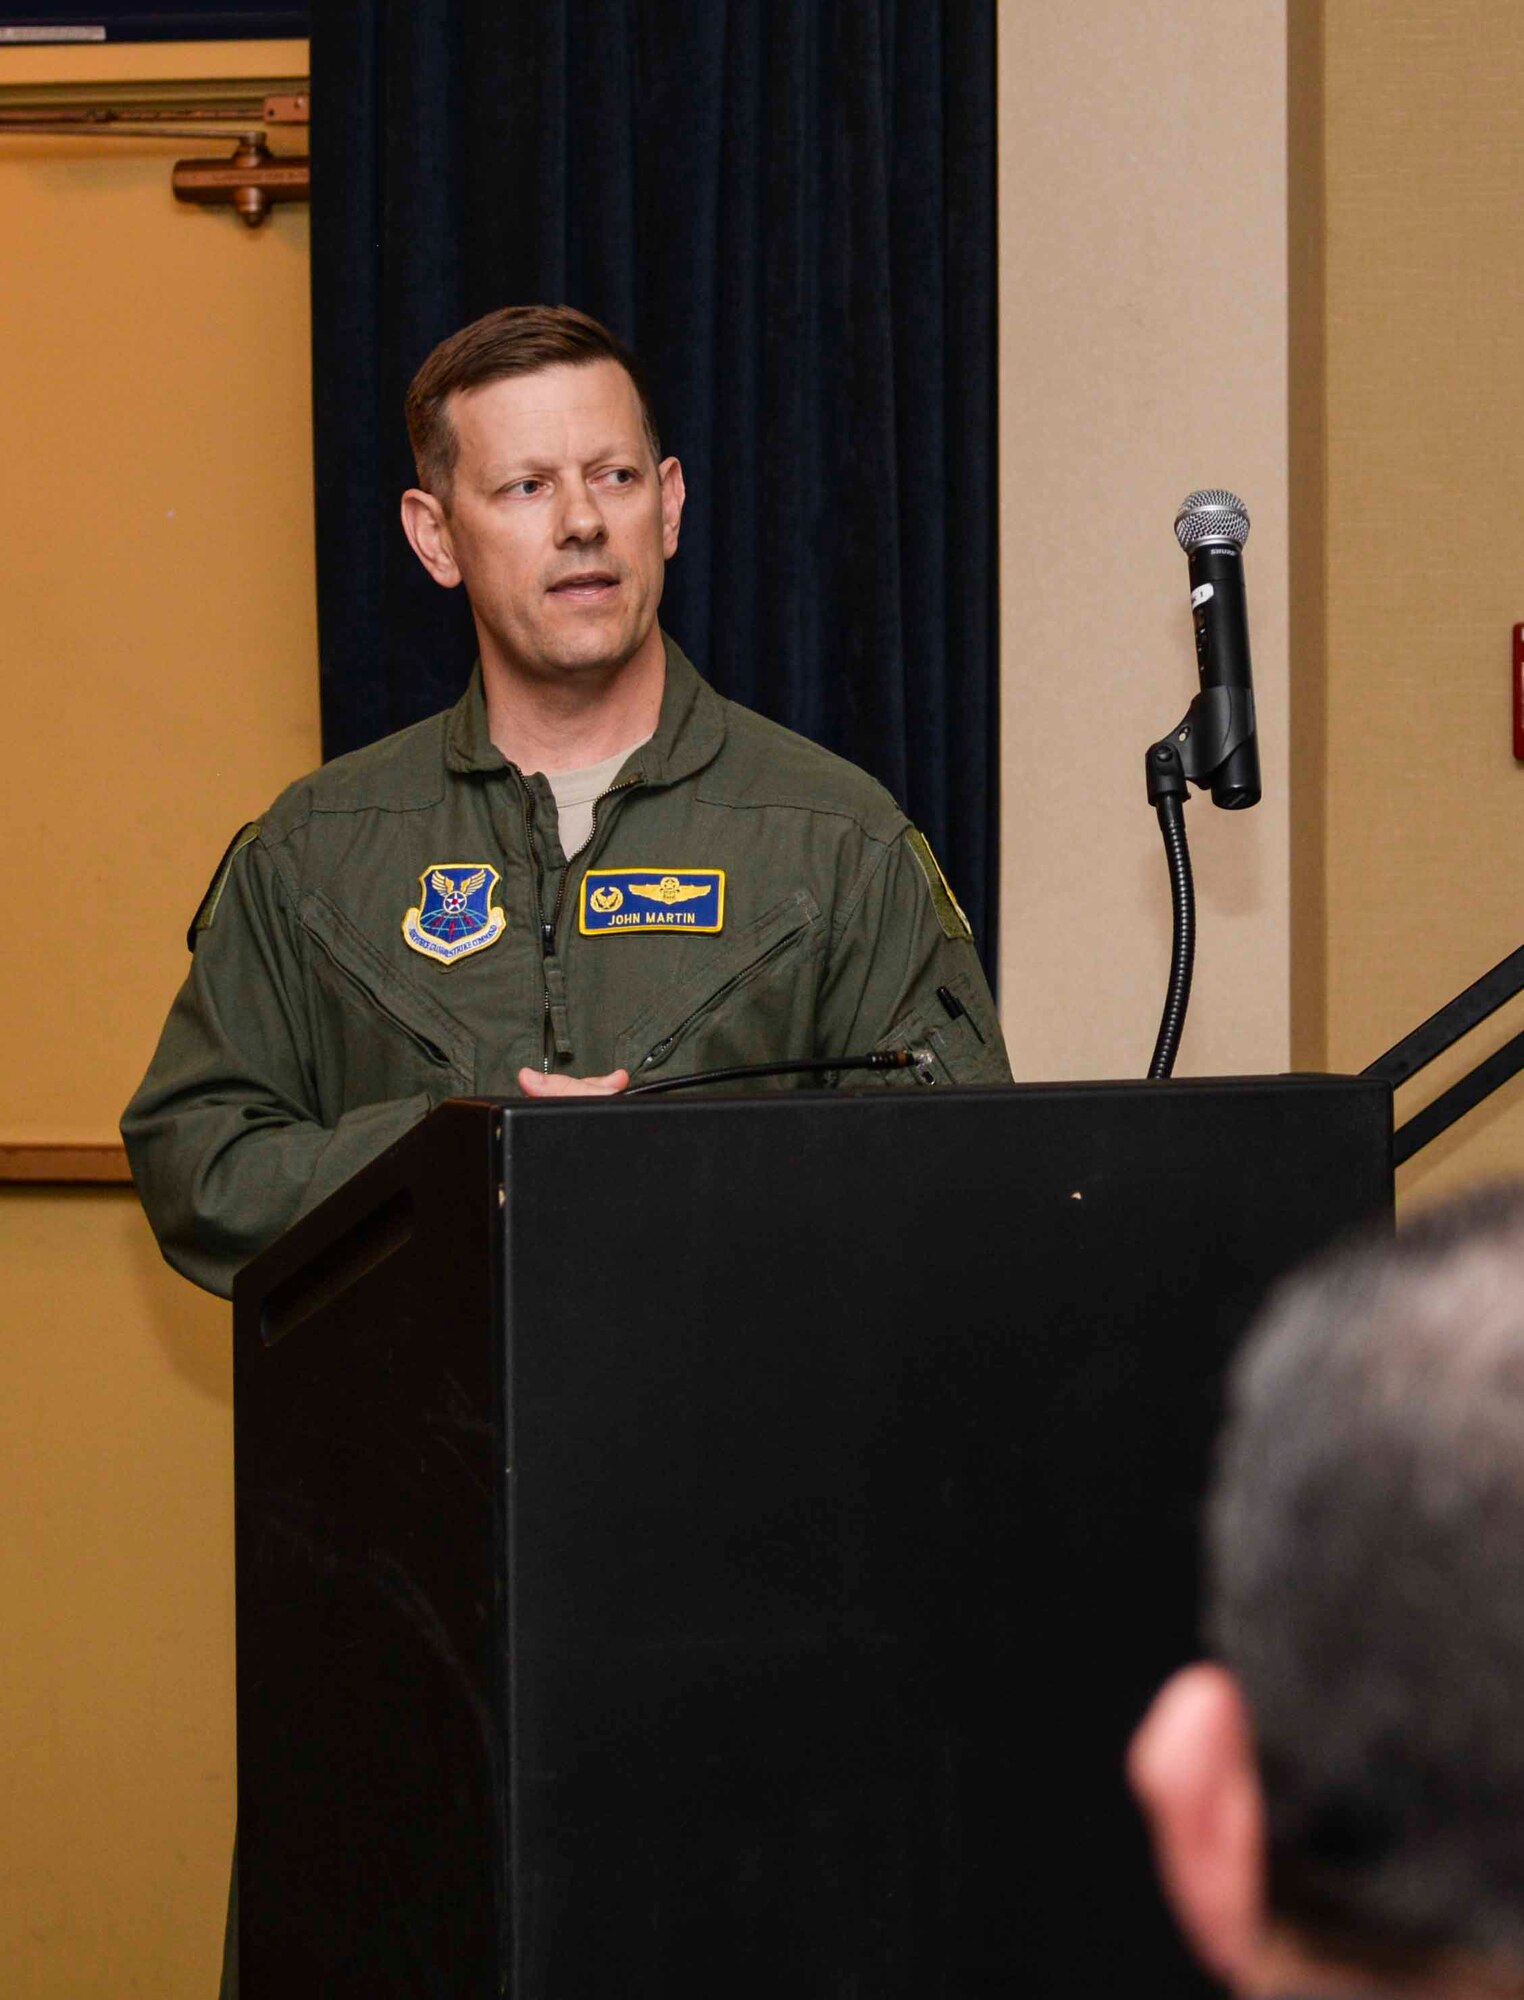 Col. John Martin, 28th Operations Group commander, speaks to Ellsworth Airmen about the importance of their heritage during the Doolittle Raider toast ceremony at Ellsworth Air Force Base, S.D., April 18, 2016. On April 18, 1942, 80 pilots led by Lt. Col. James Doolittle launched 16 B-25 aircraft to retaliate against Japan for the attack on Pearl Harbor, marking it the first major planning collaboration for a joint service mission. (U.S. Air Force photo by Airman 1st Class Sadie Colbert/Released)